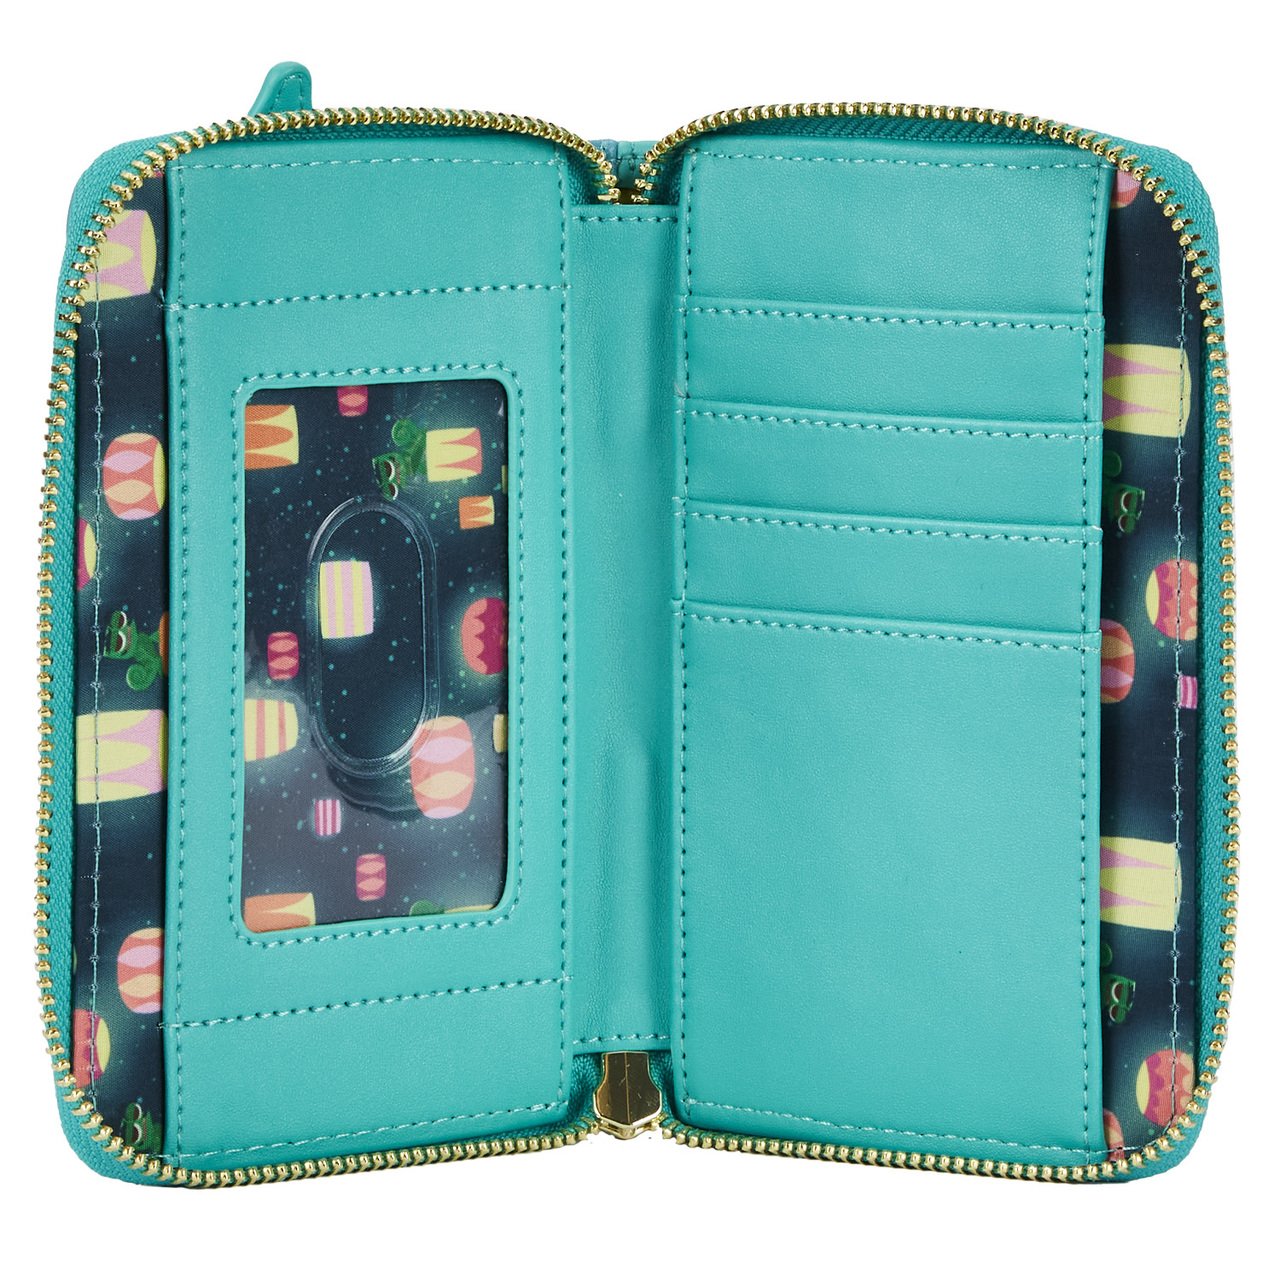 Loungefly Disney Princesses Castles All Over Print Wallet